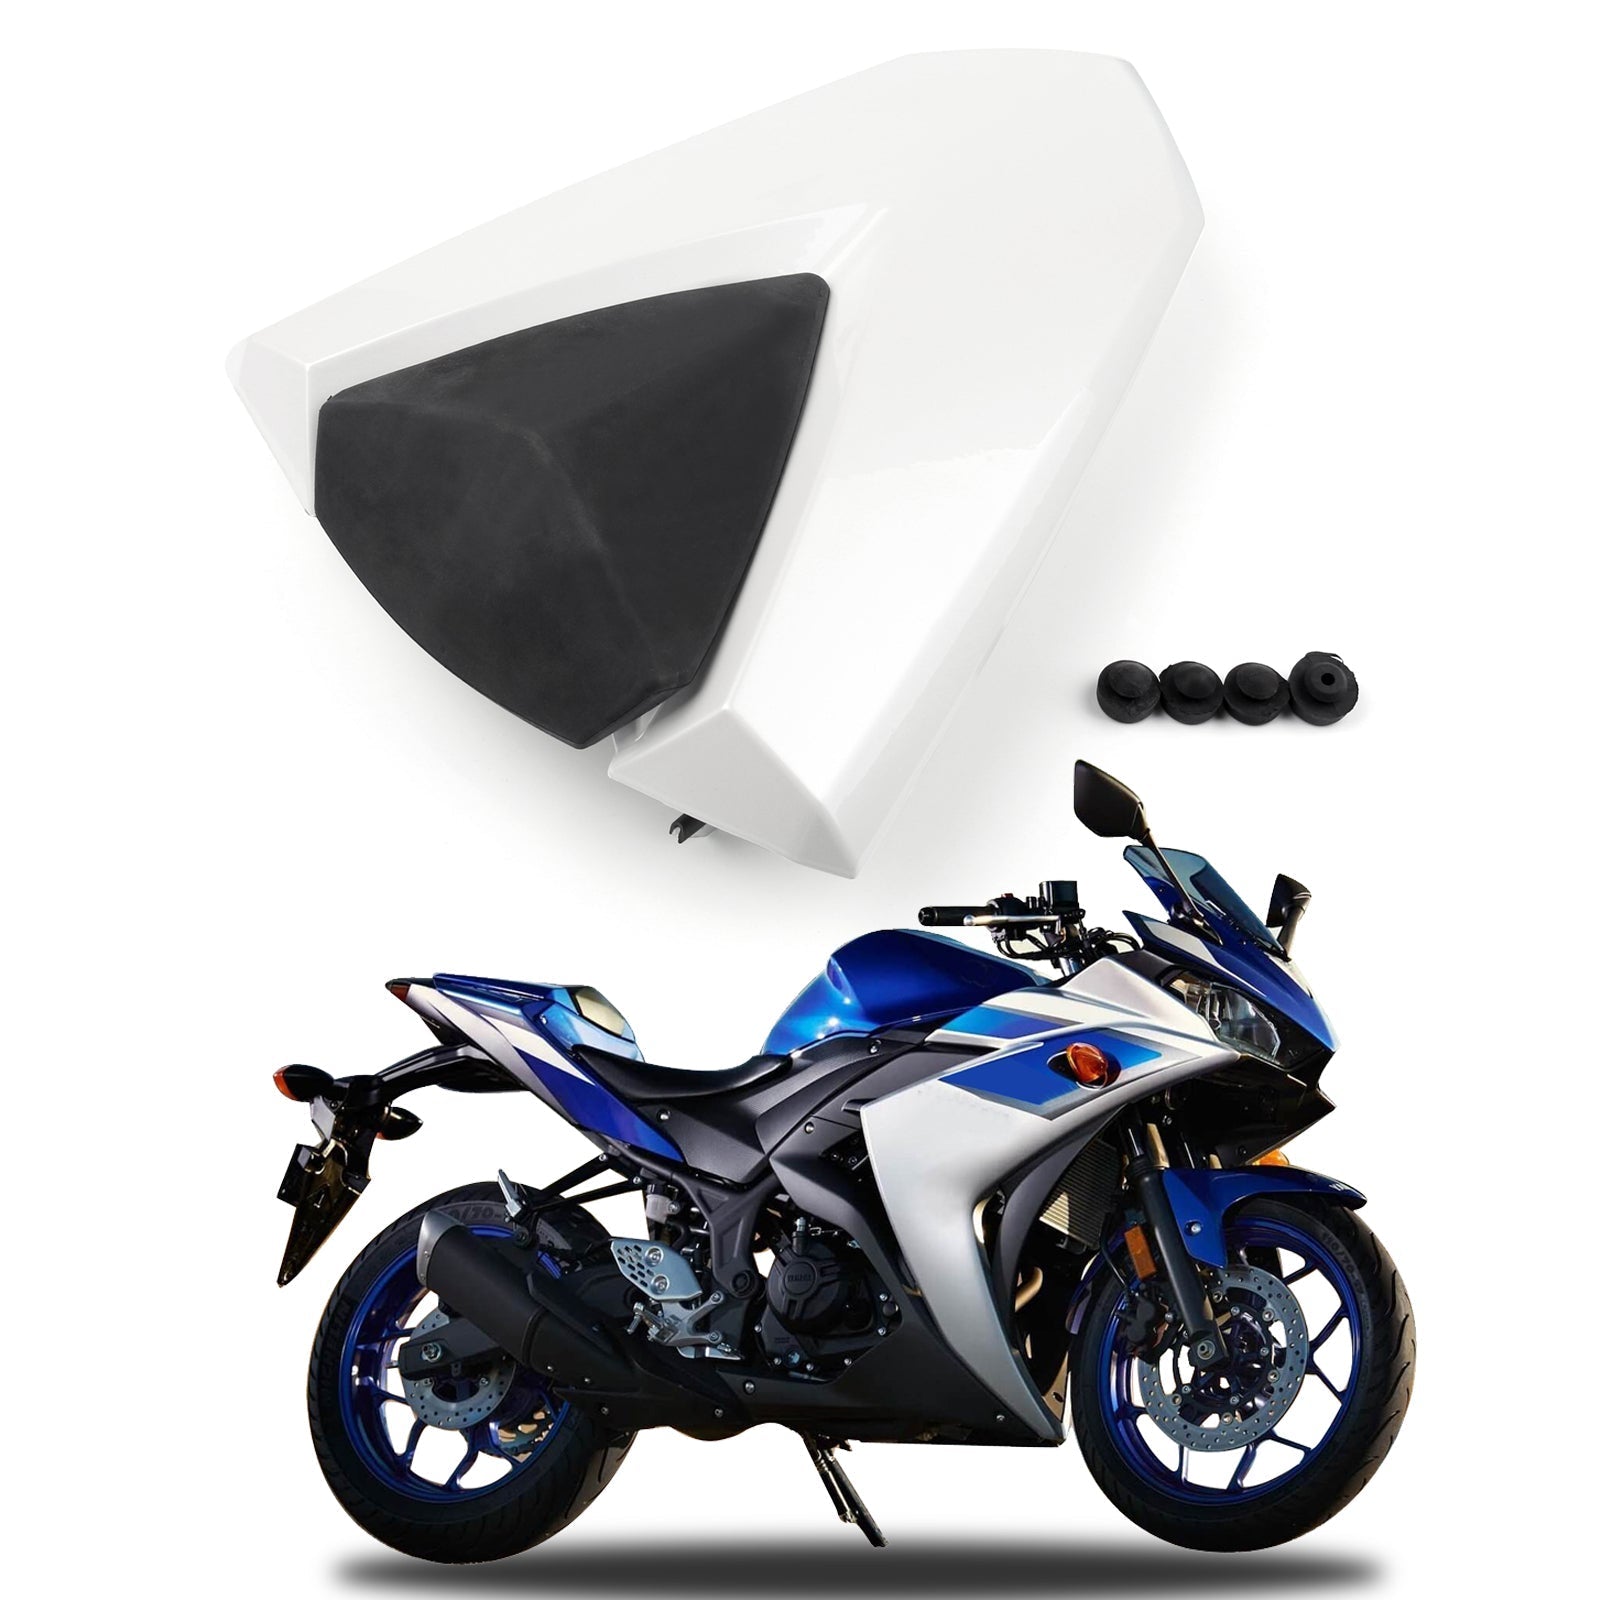 Coprisedile posteriore in ABS per Yamaha YZF R25 2013-2021 R3 2015-2021 MT-03 2014 Generico